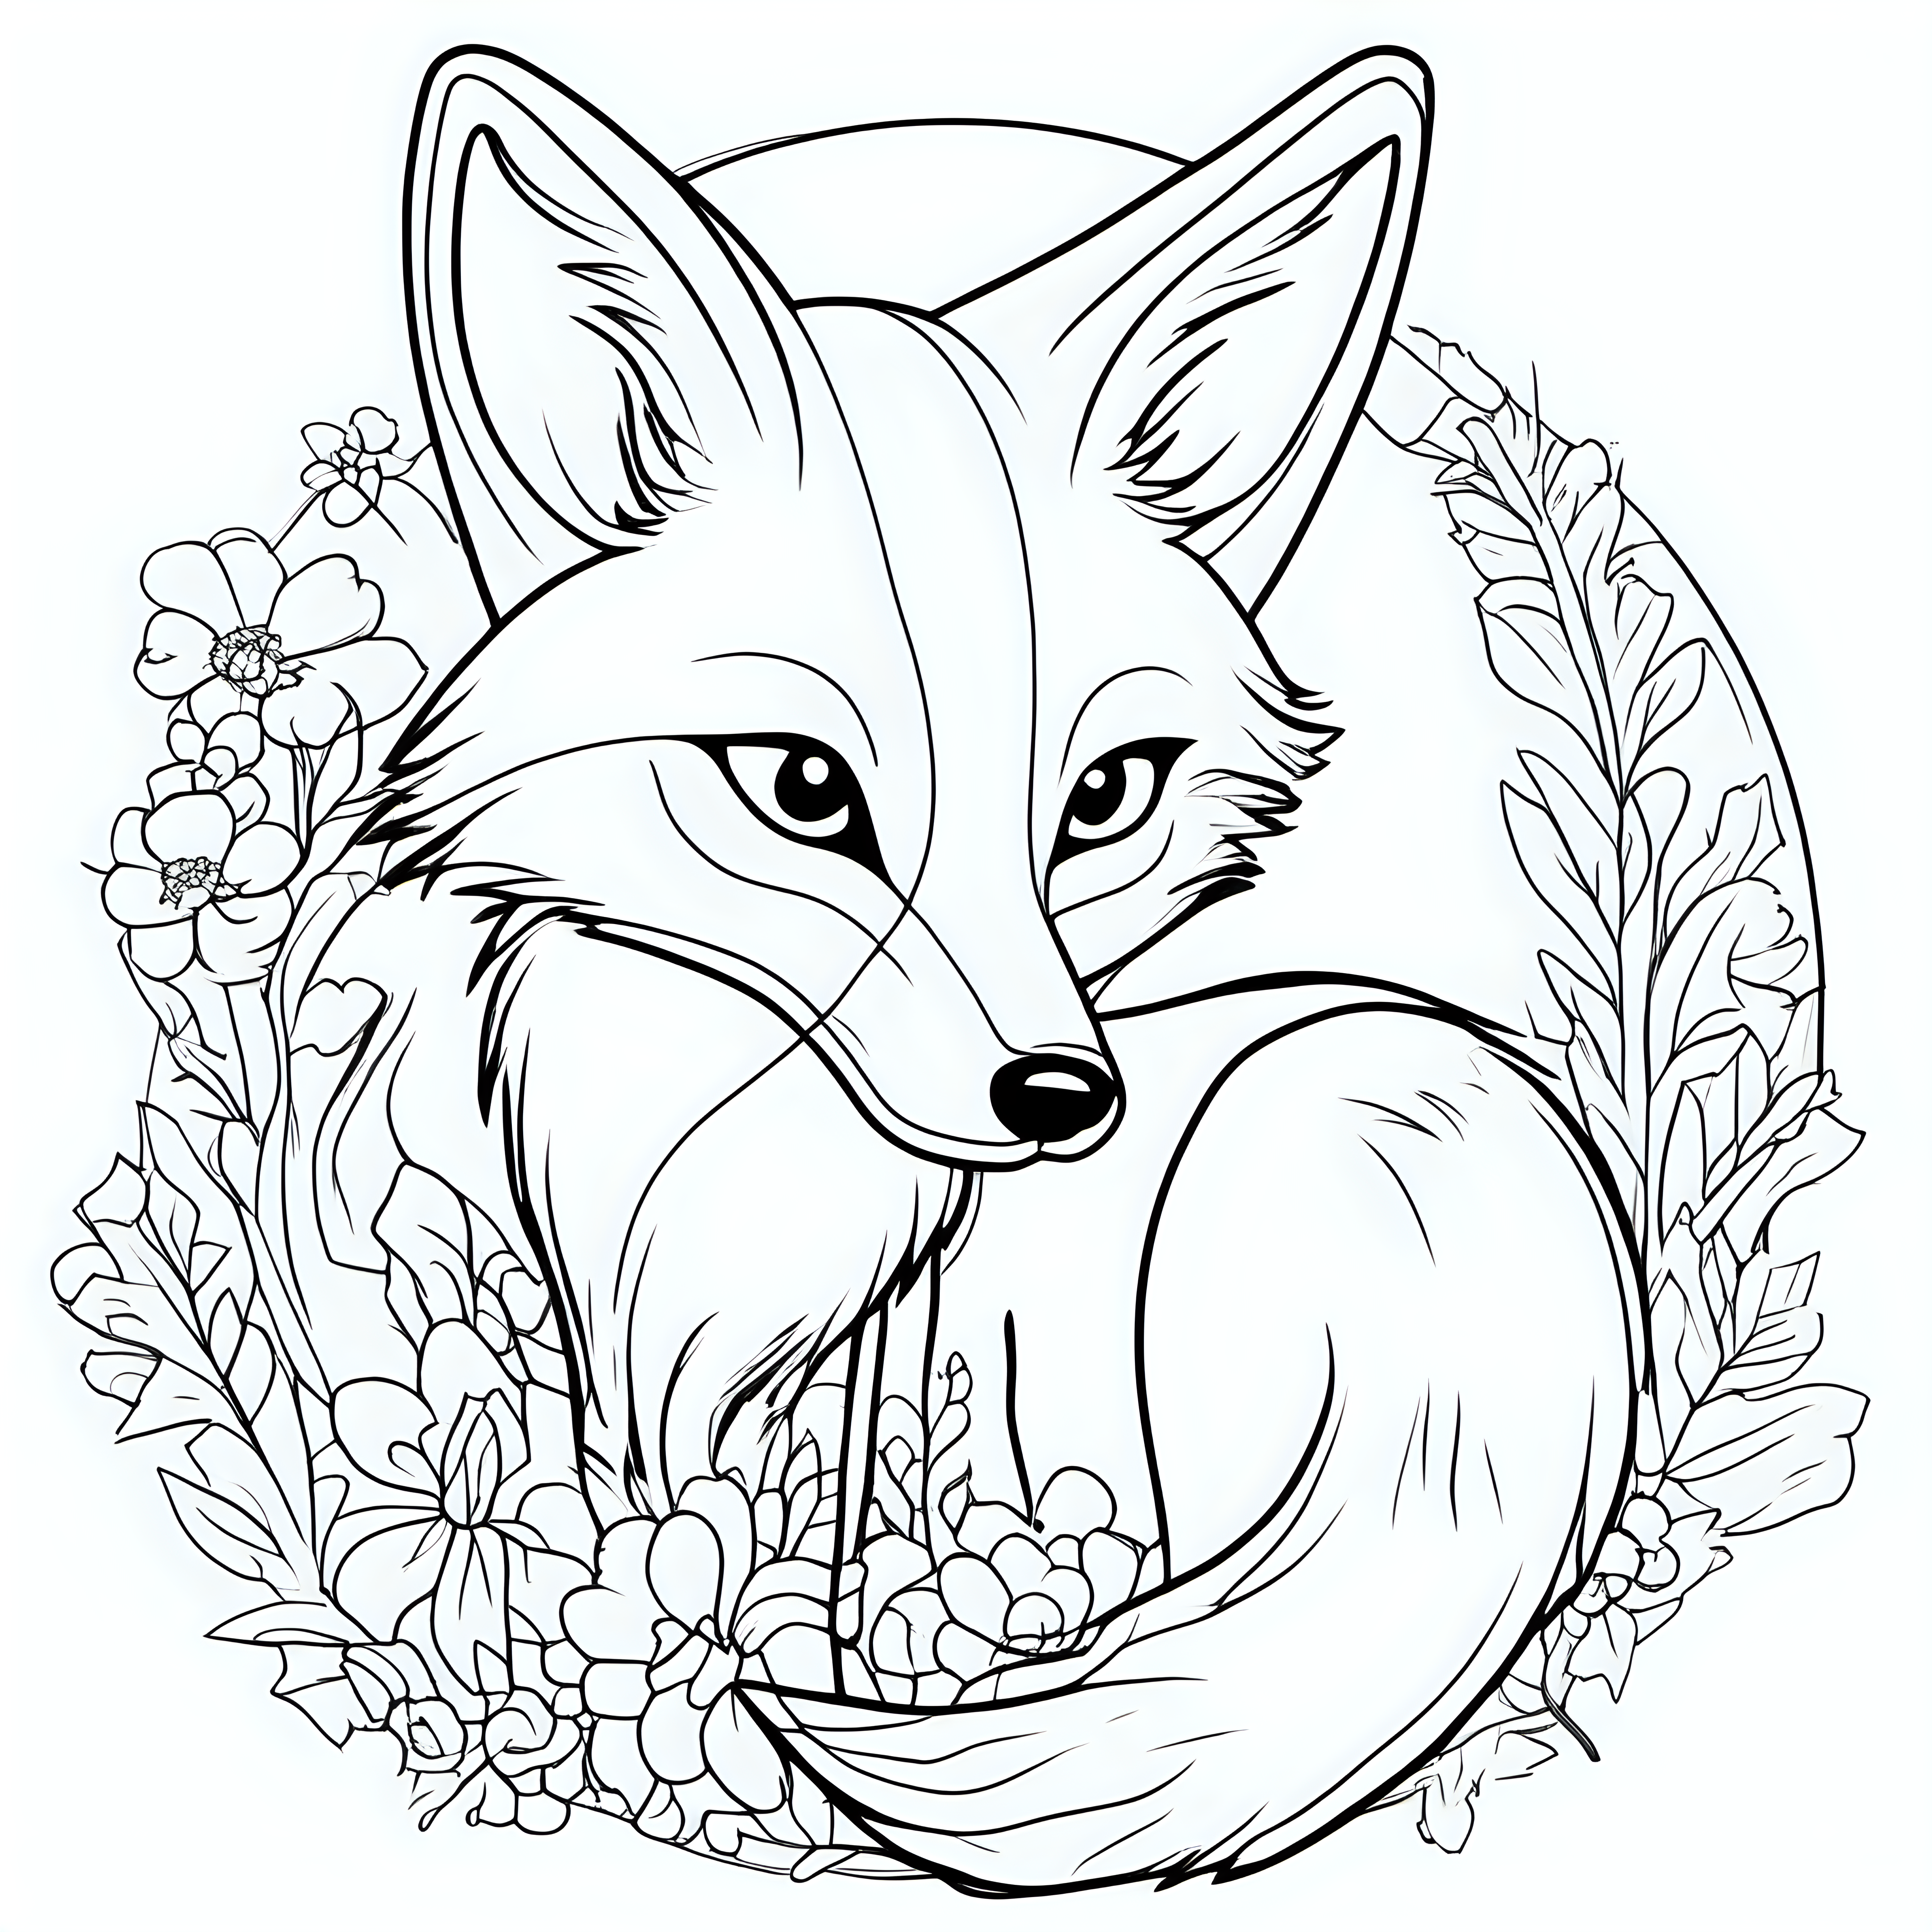 draw a cute fox with only the outline